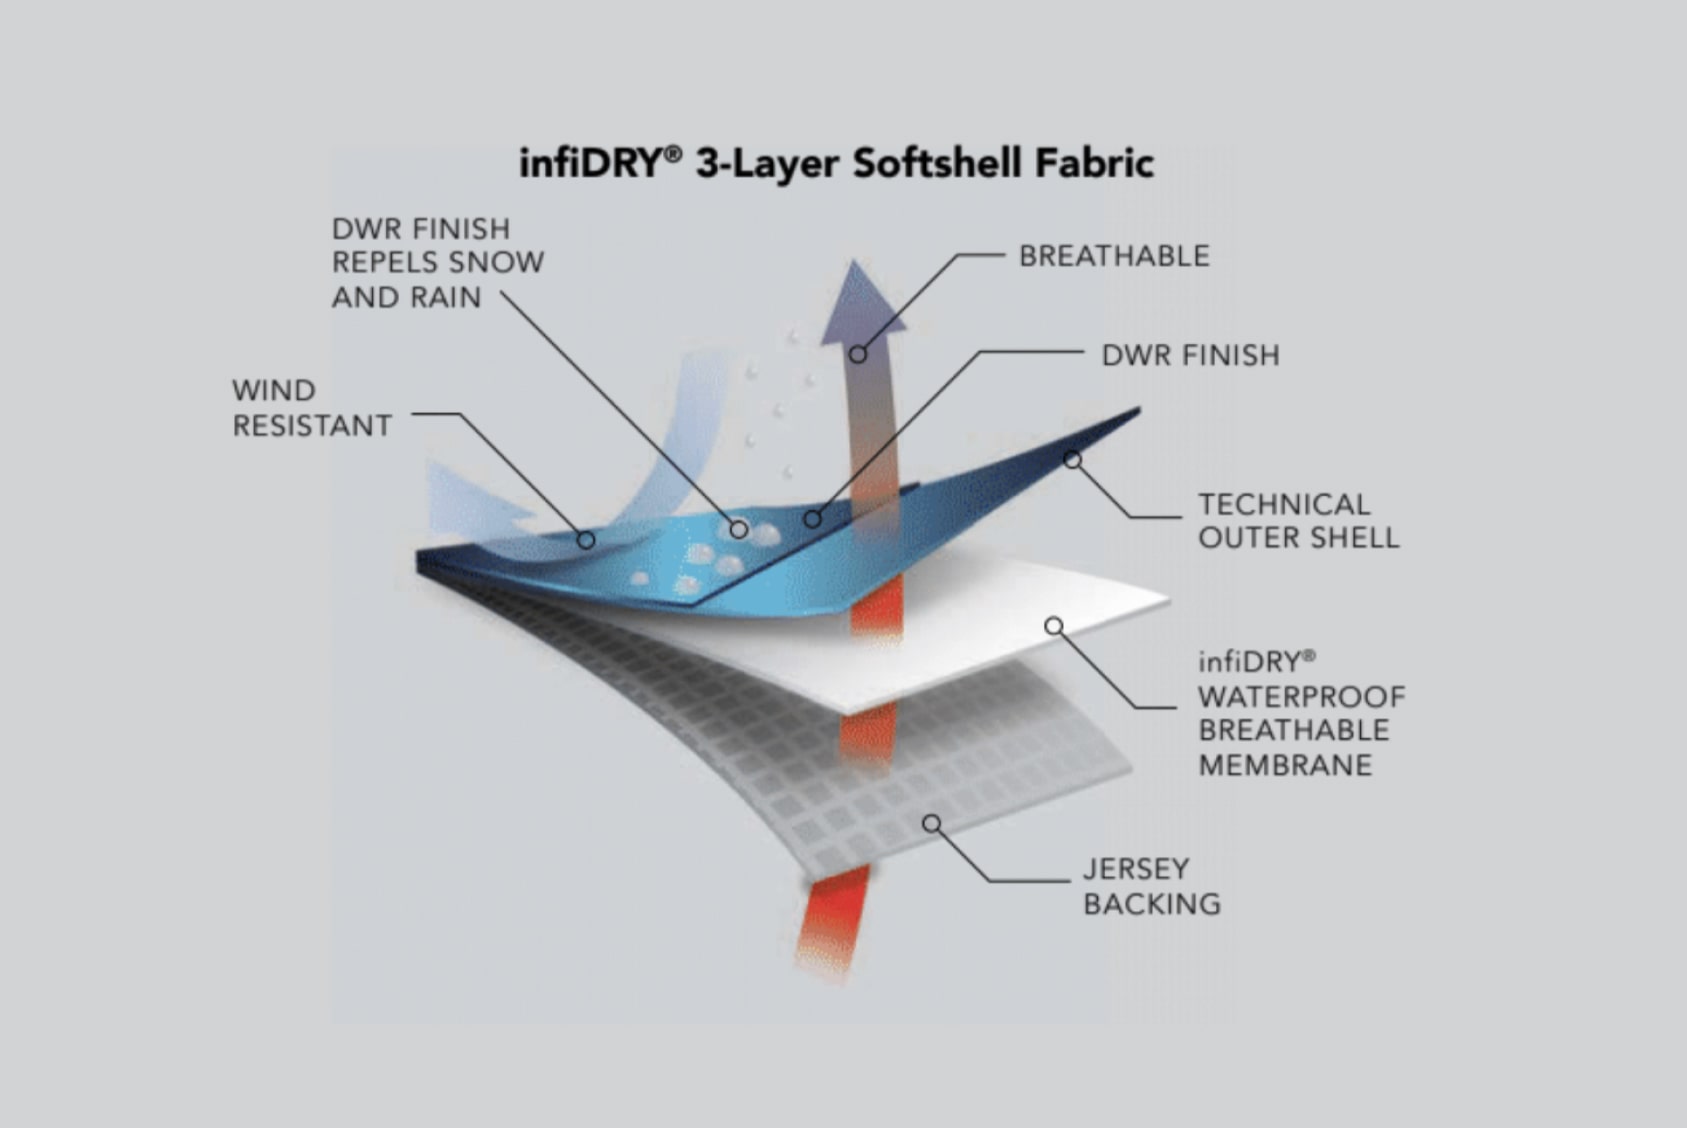 What is DWR and why is it important for waterproof fabric?